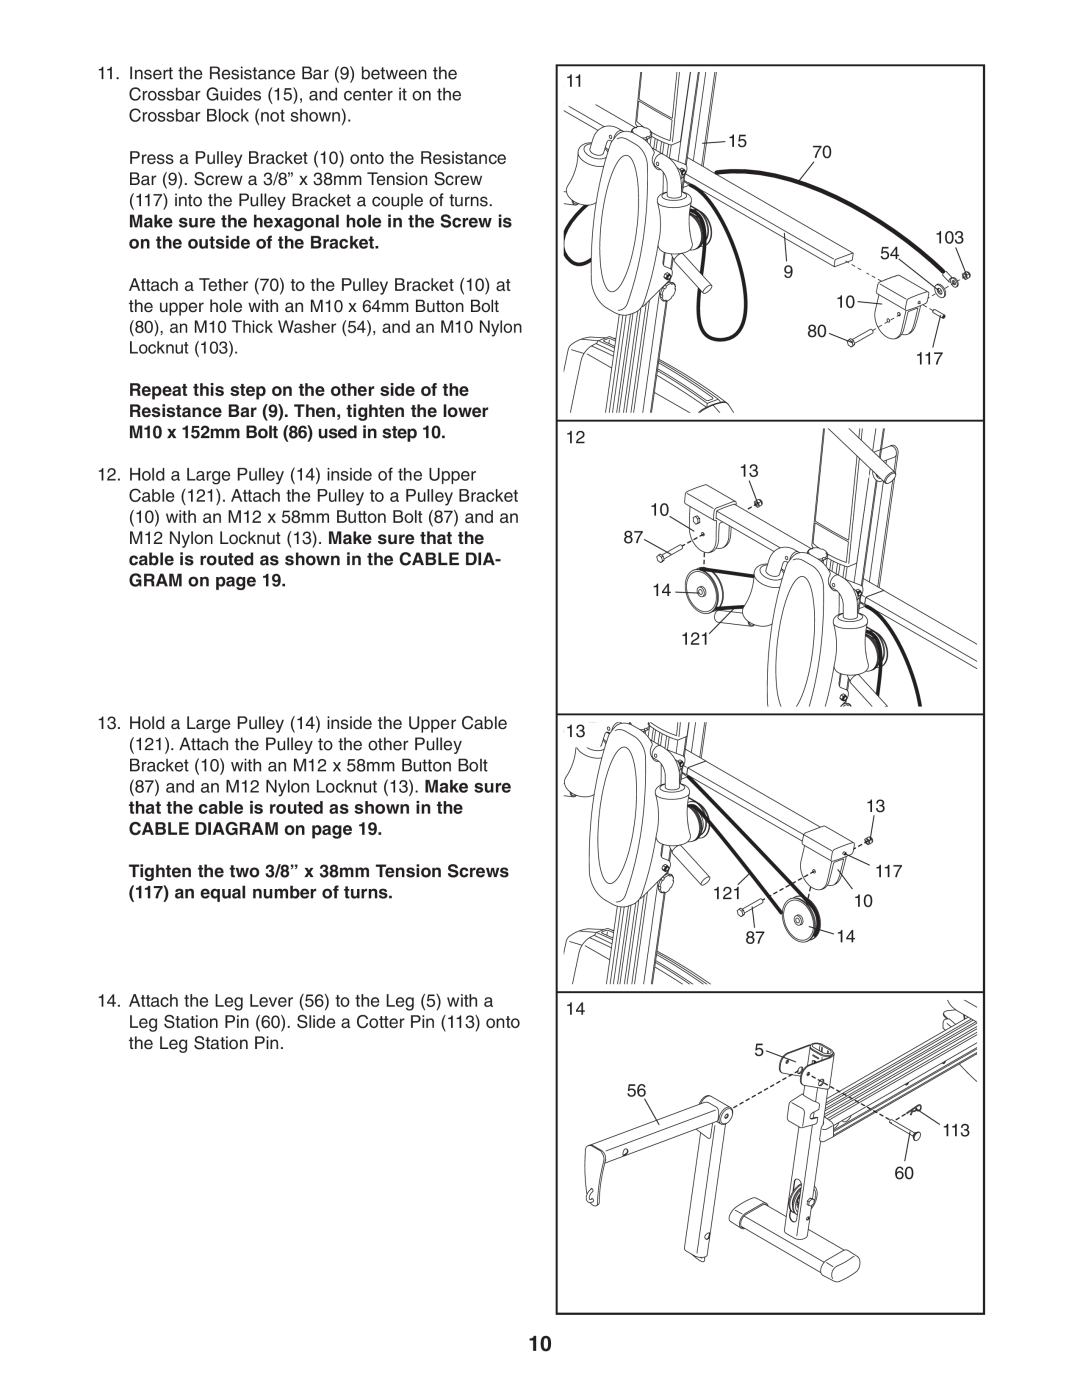 Weider WESY78734 user manual Tighten the two 3/8” x 38mm Tension Screws, an equal number of turns 